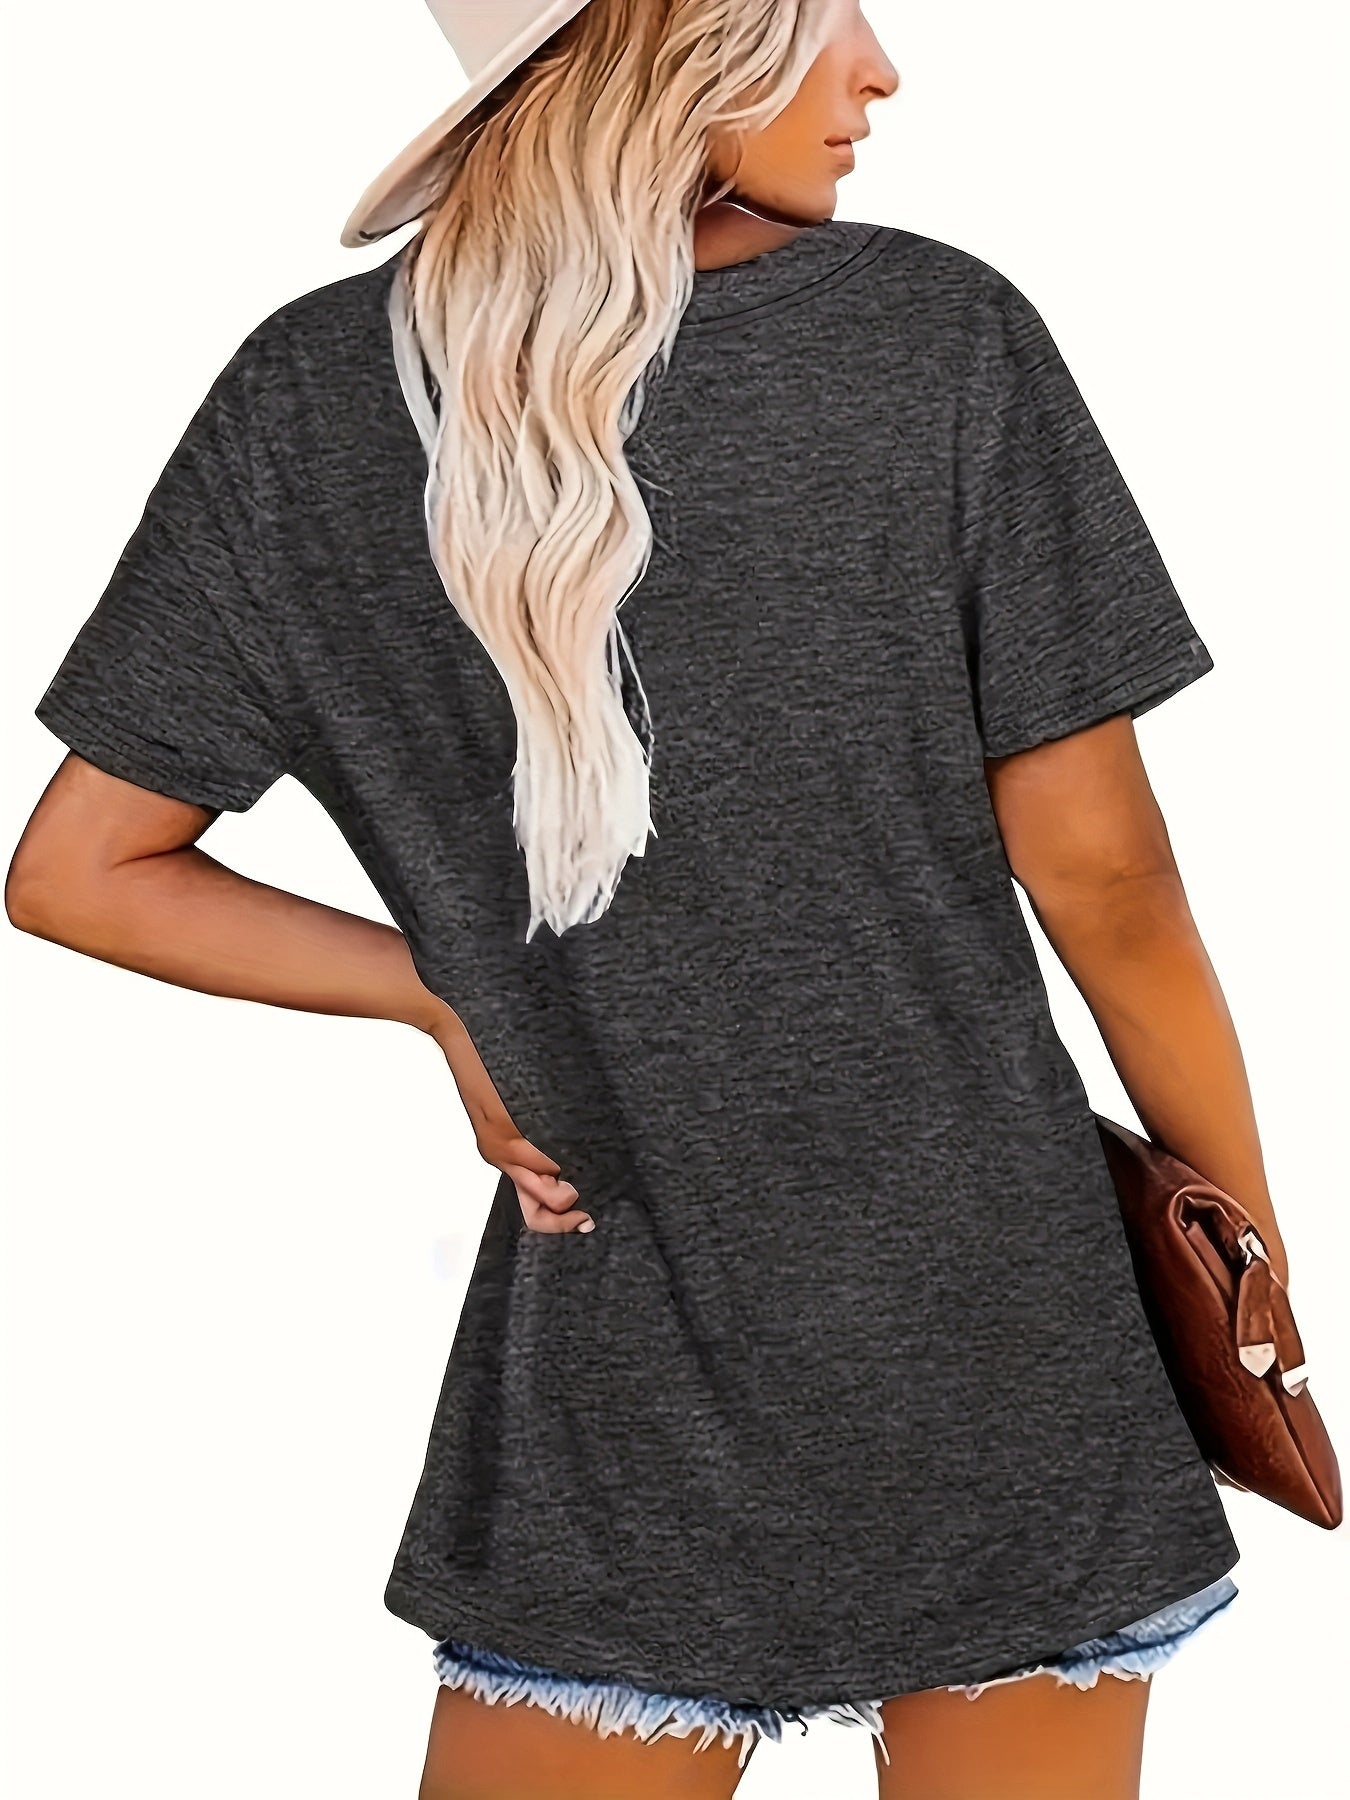 Letter Print Crew Neck T-shirt, Casual Short Sleeve Top, Women's Clothing